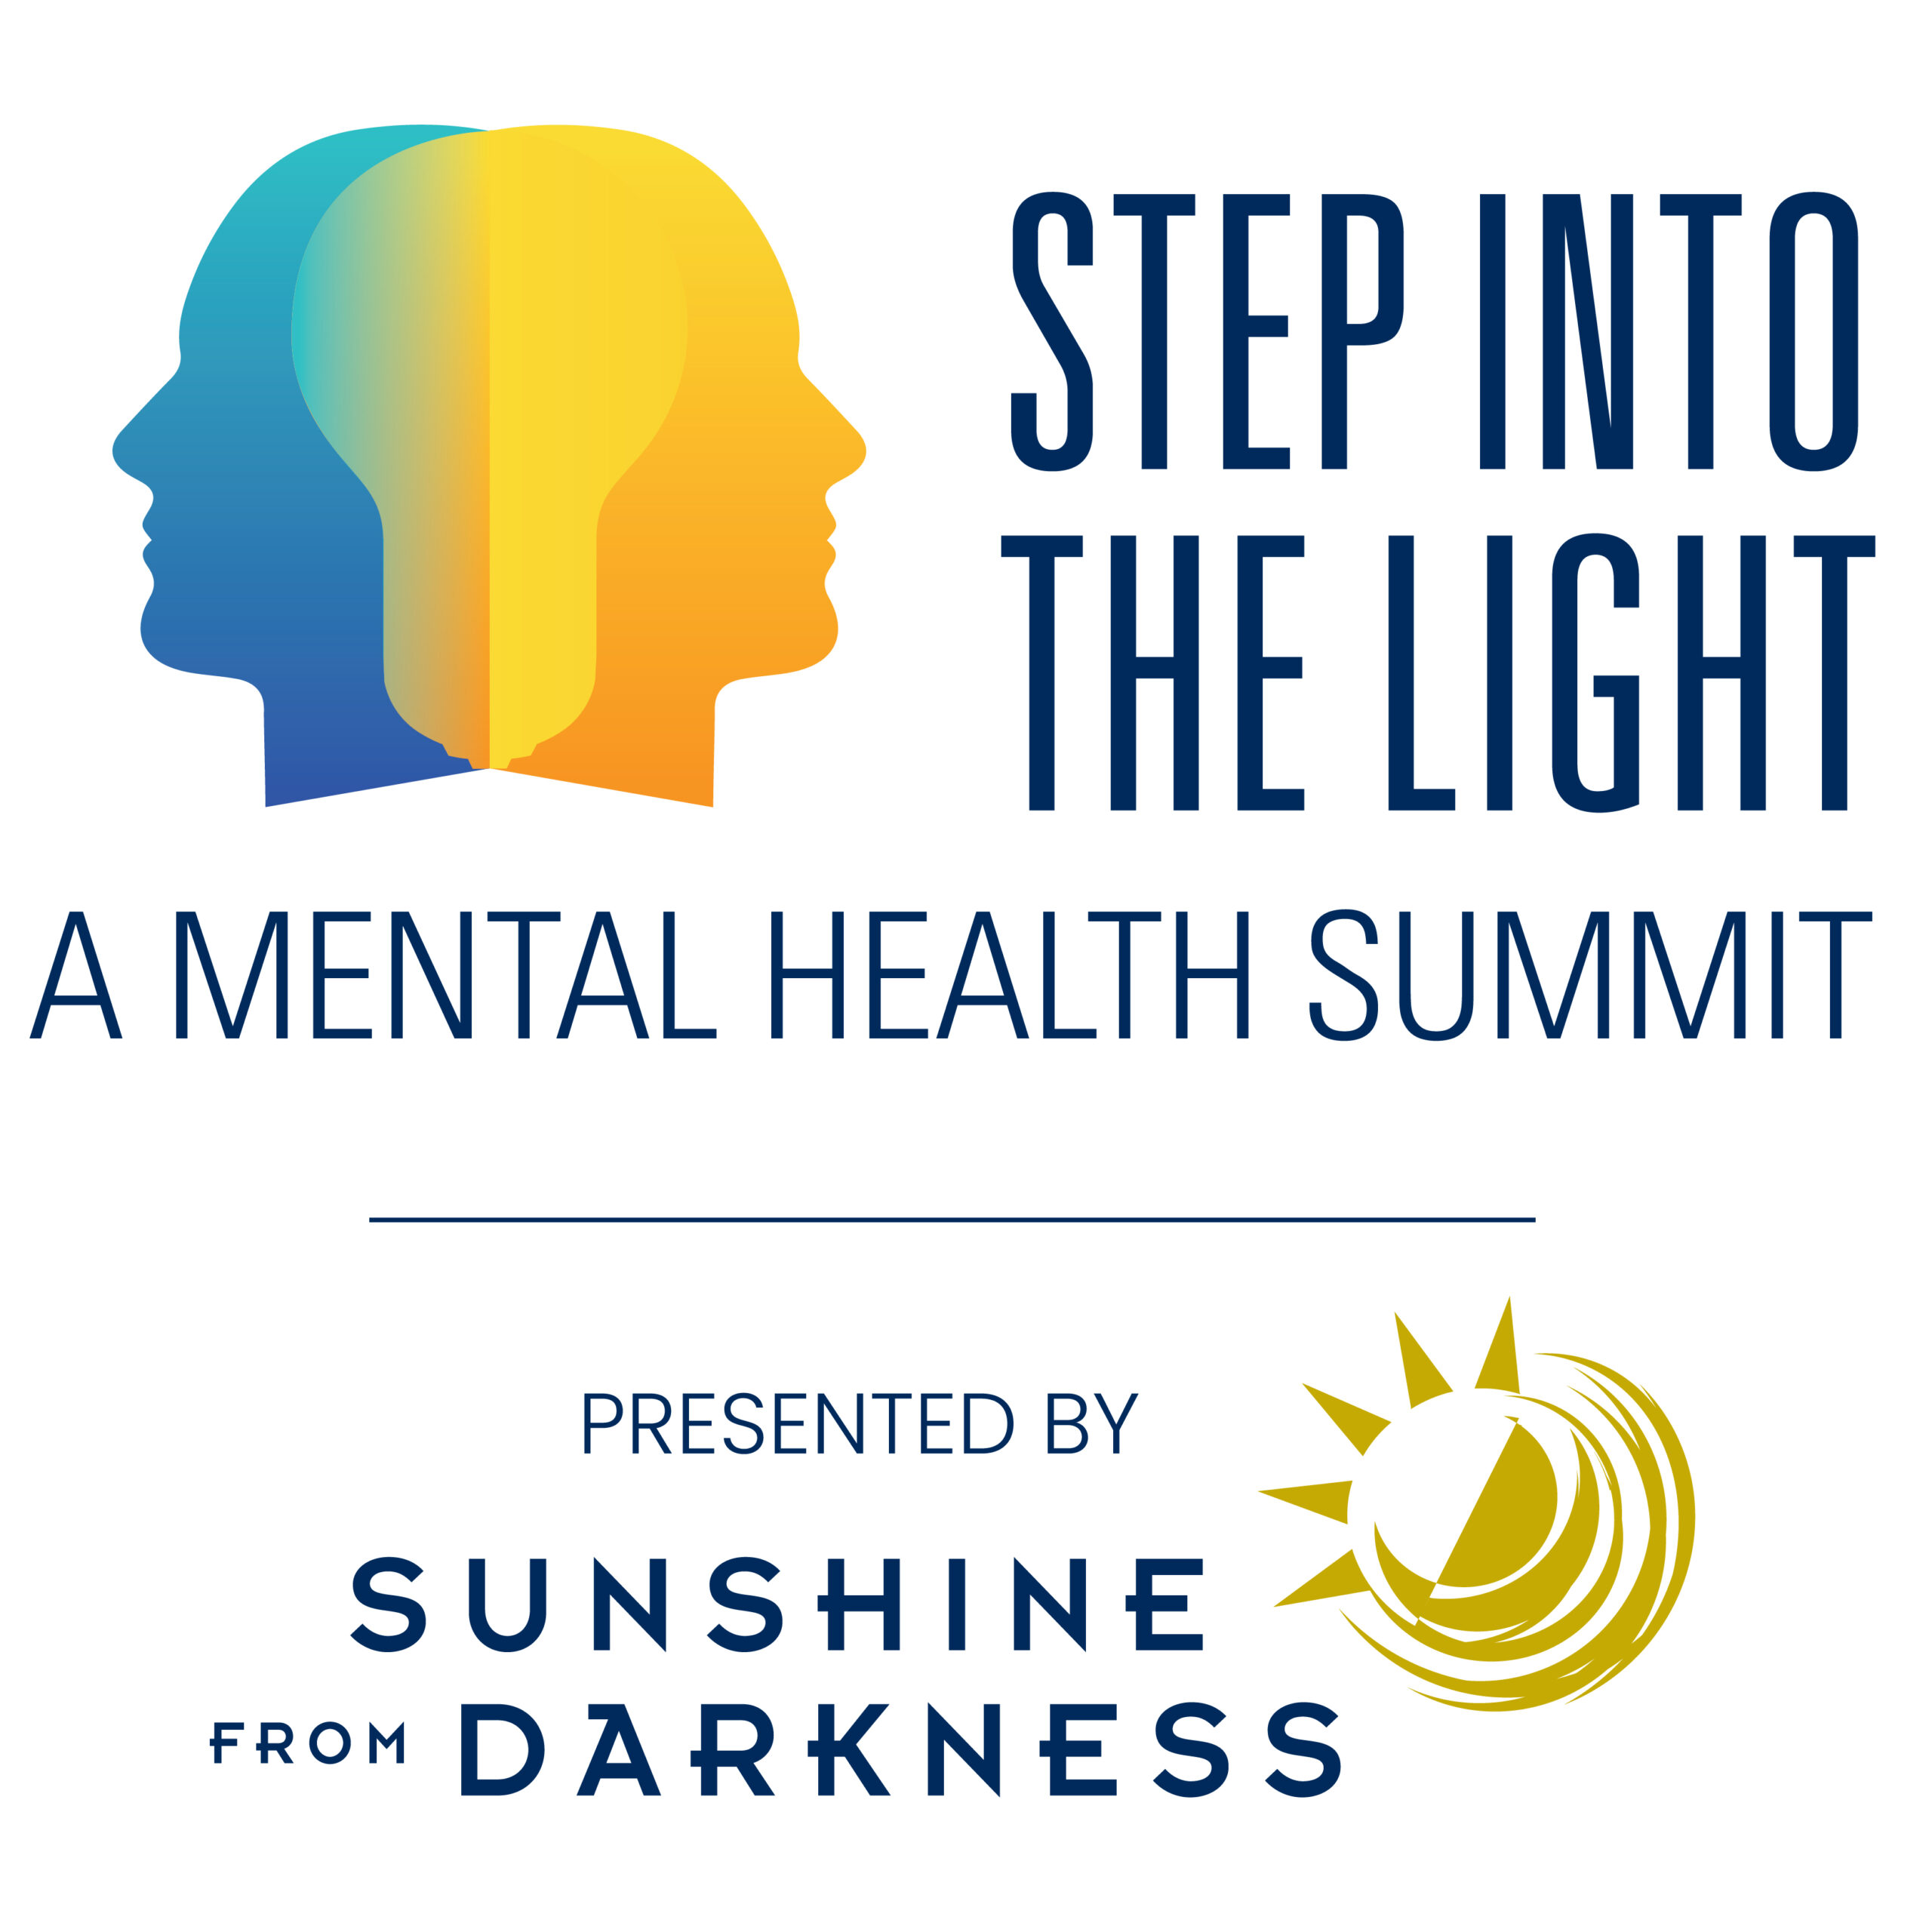 Join us at Step Into the Light!